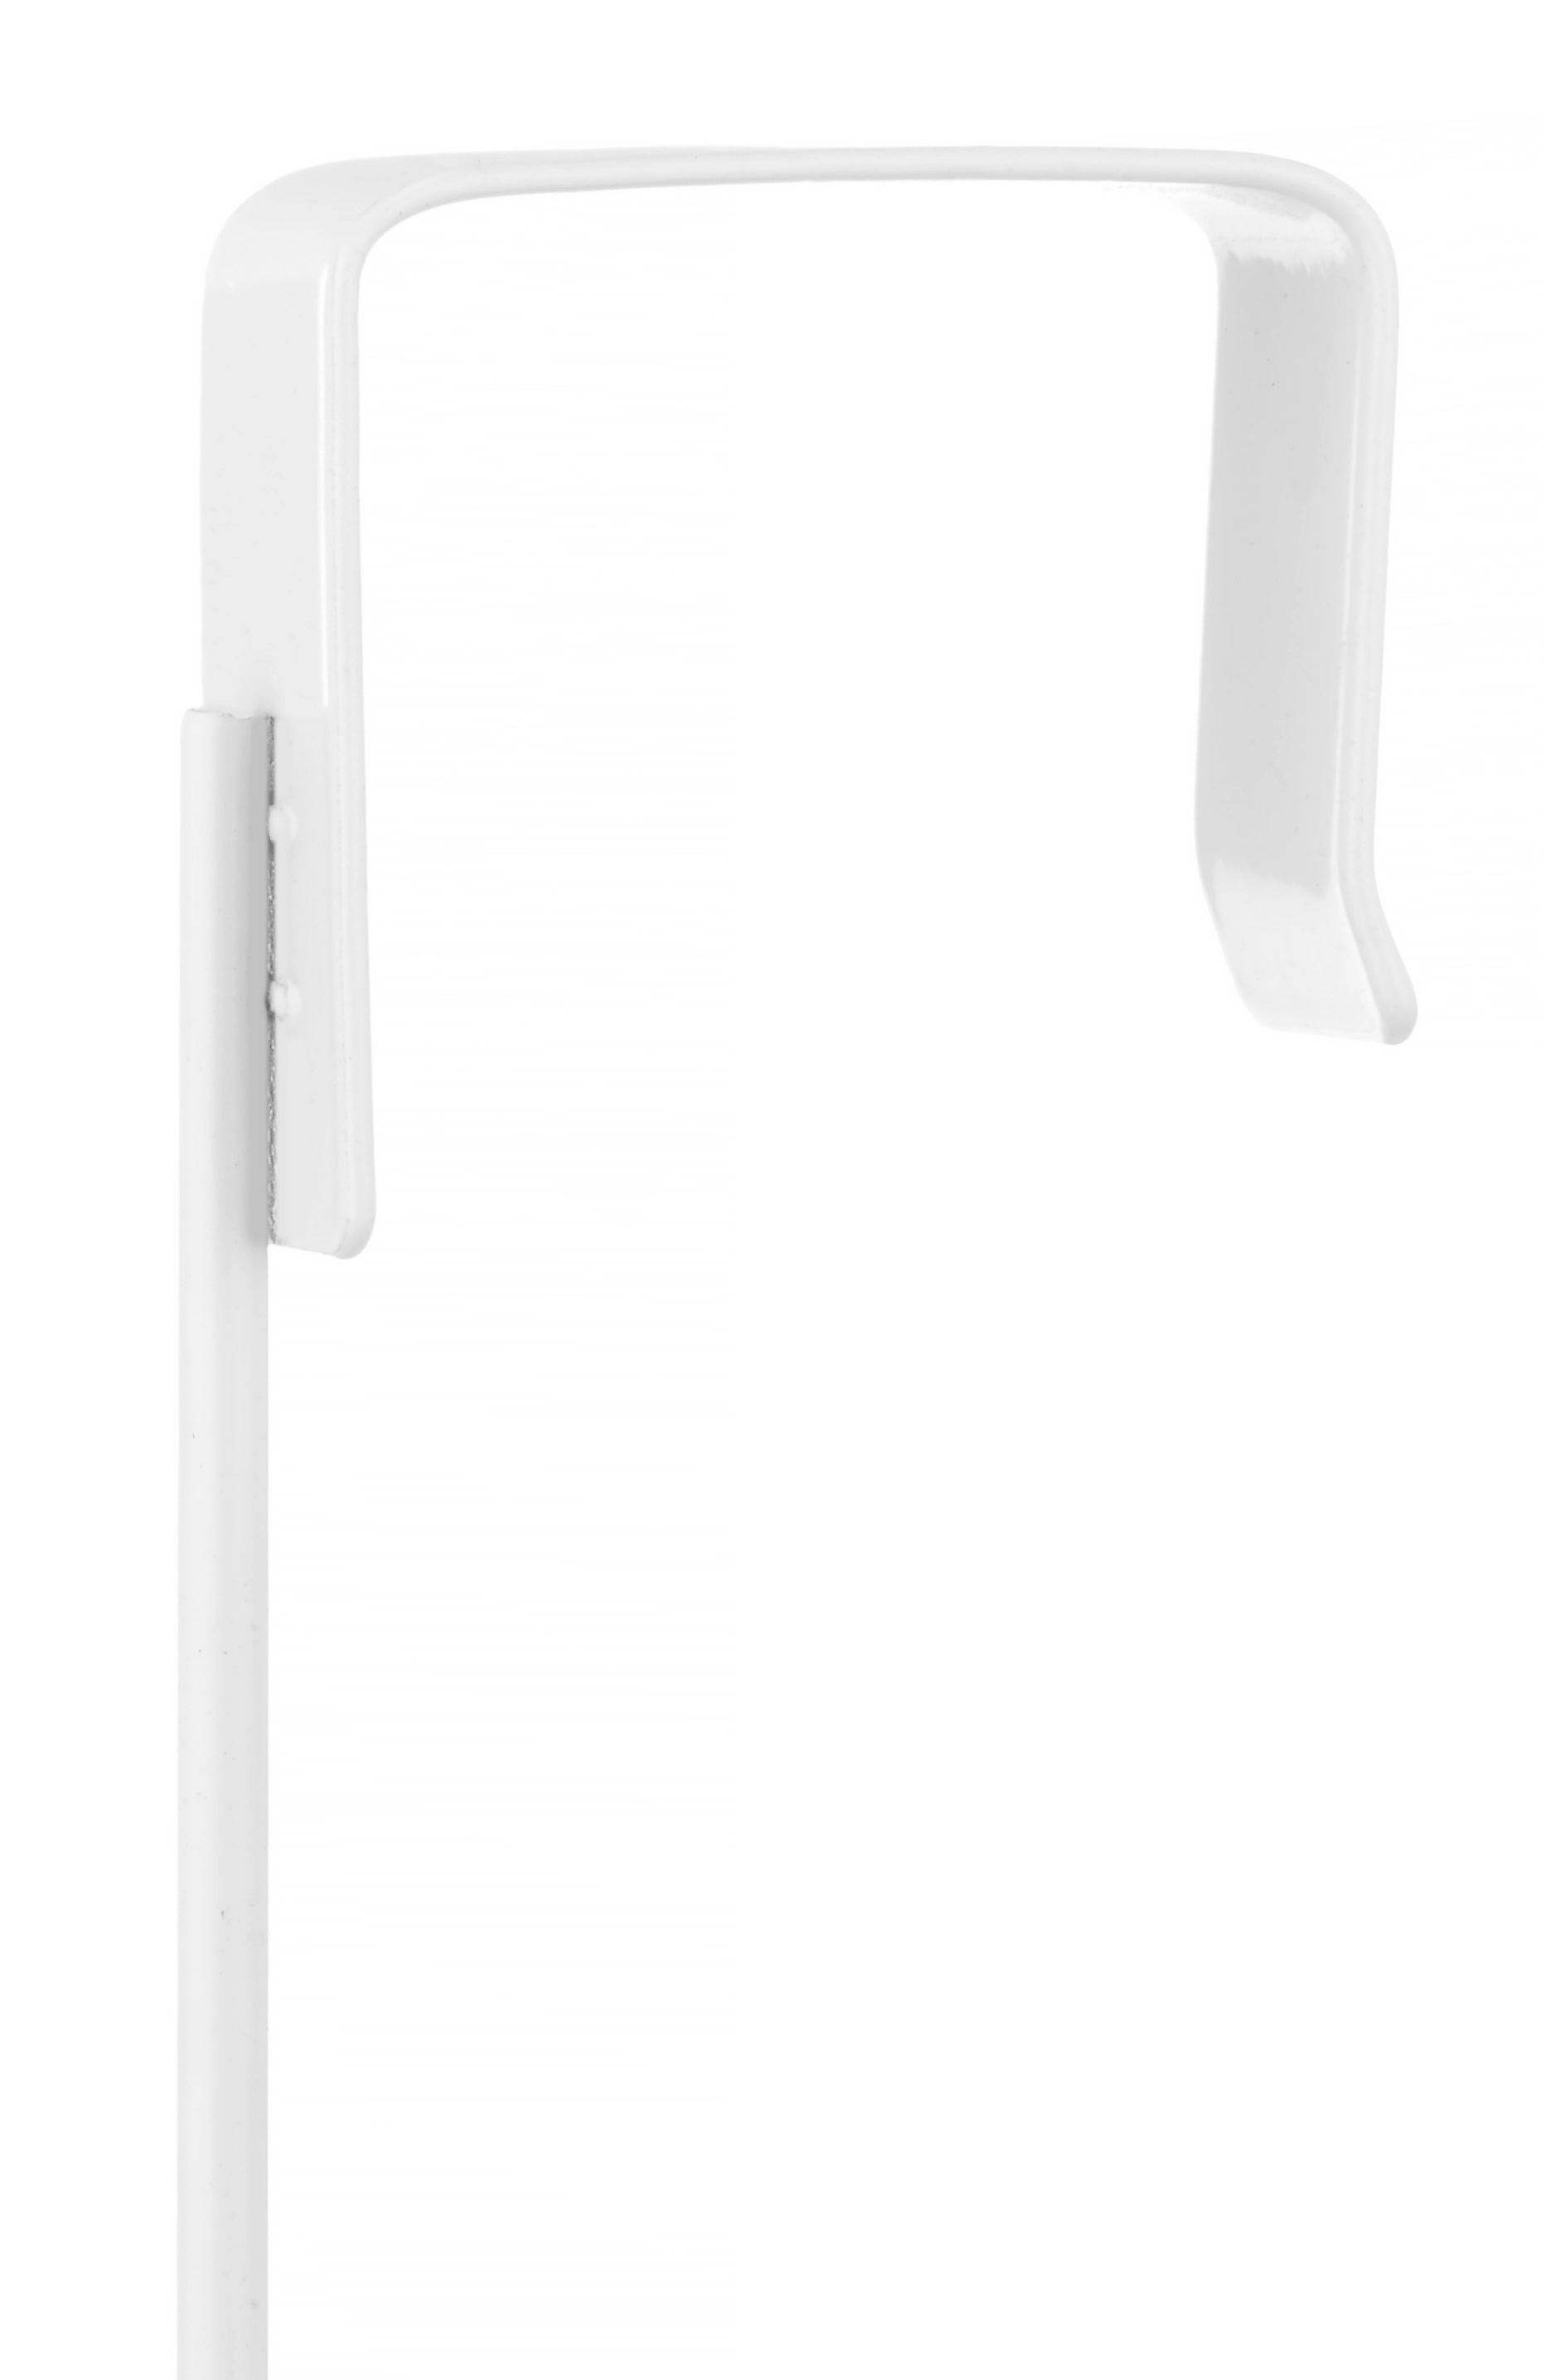 Whitmor Manufacturing 6022-200 White Over The Door Storage Hook - image 3 of 7